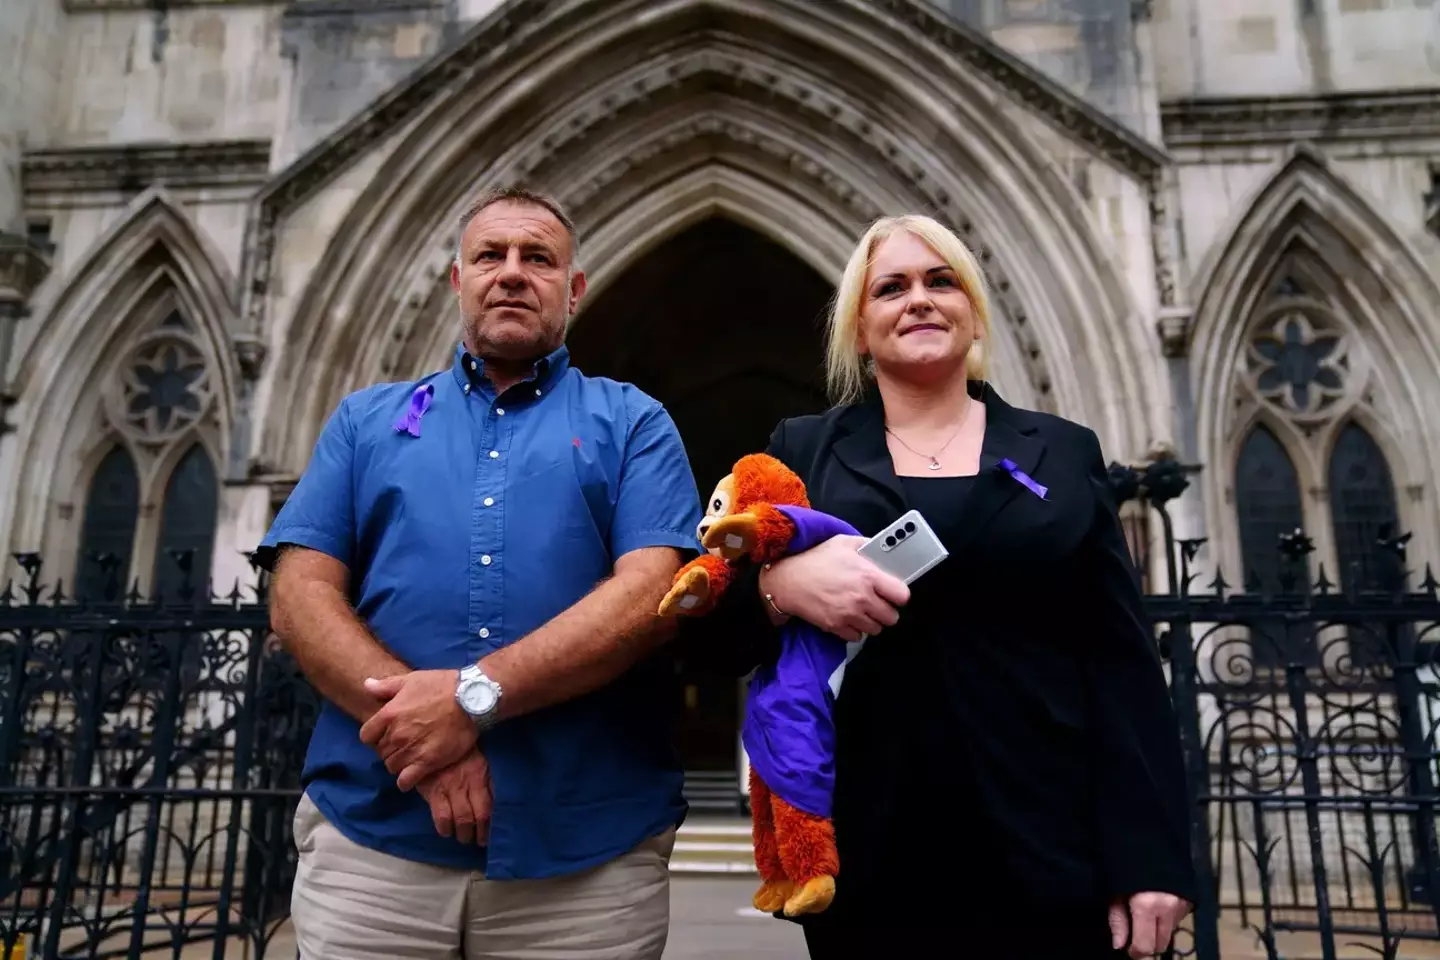 Archie's parents Paul and Hollie continue to fight the ruling.